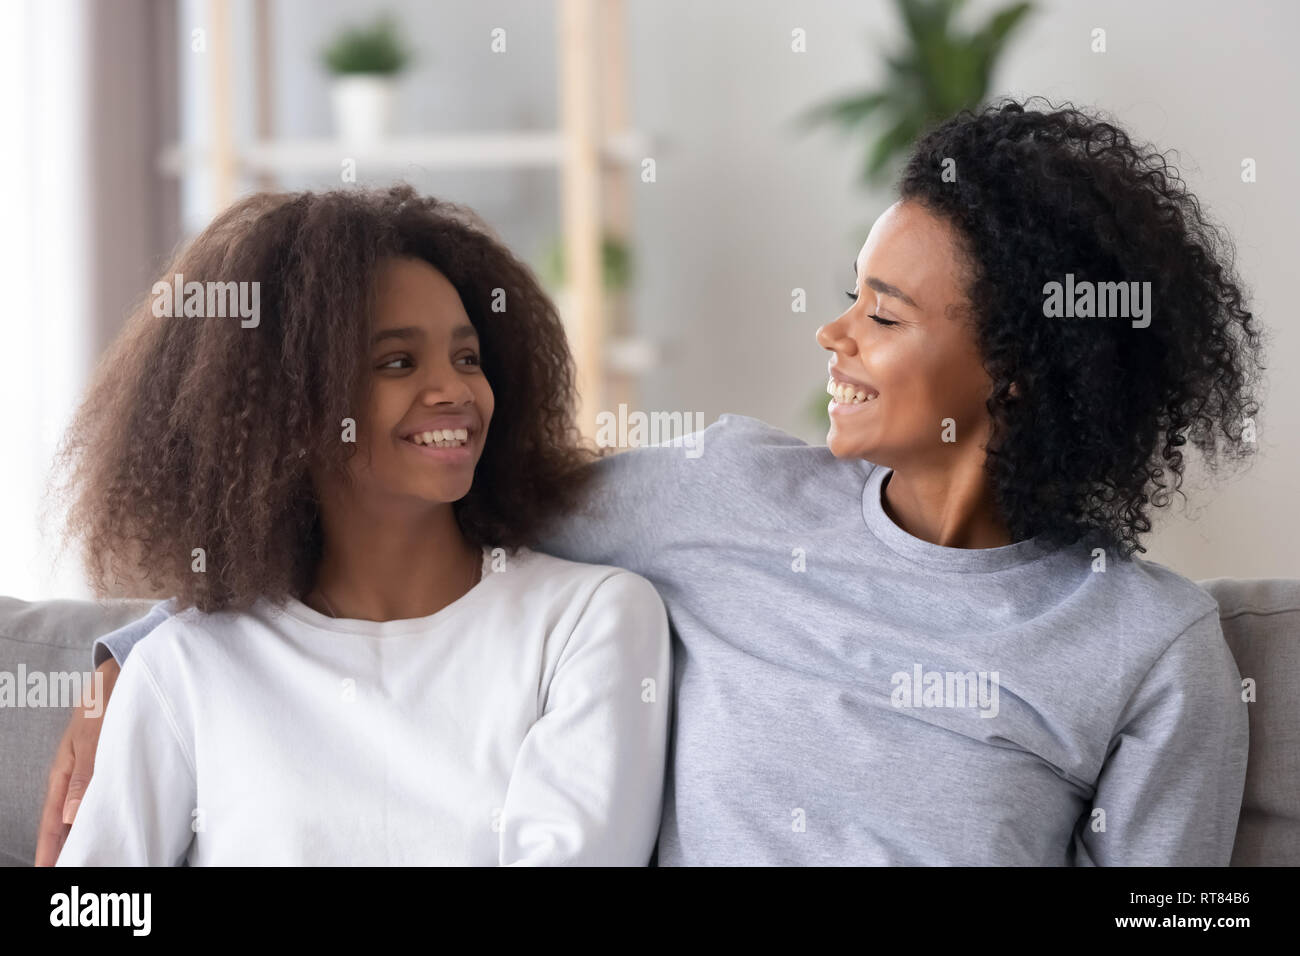 African loving mother embracing looking at adolescent daughter Stock Photo